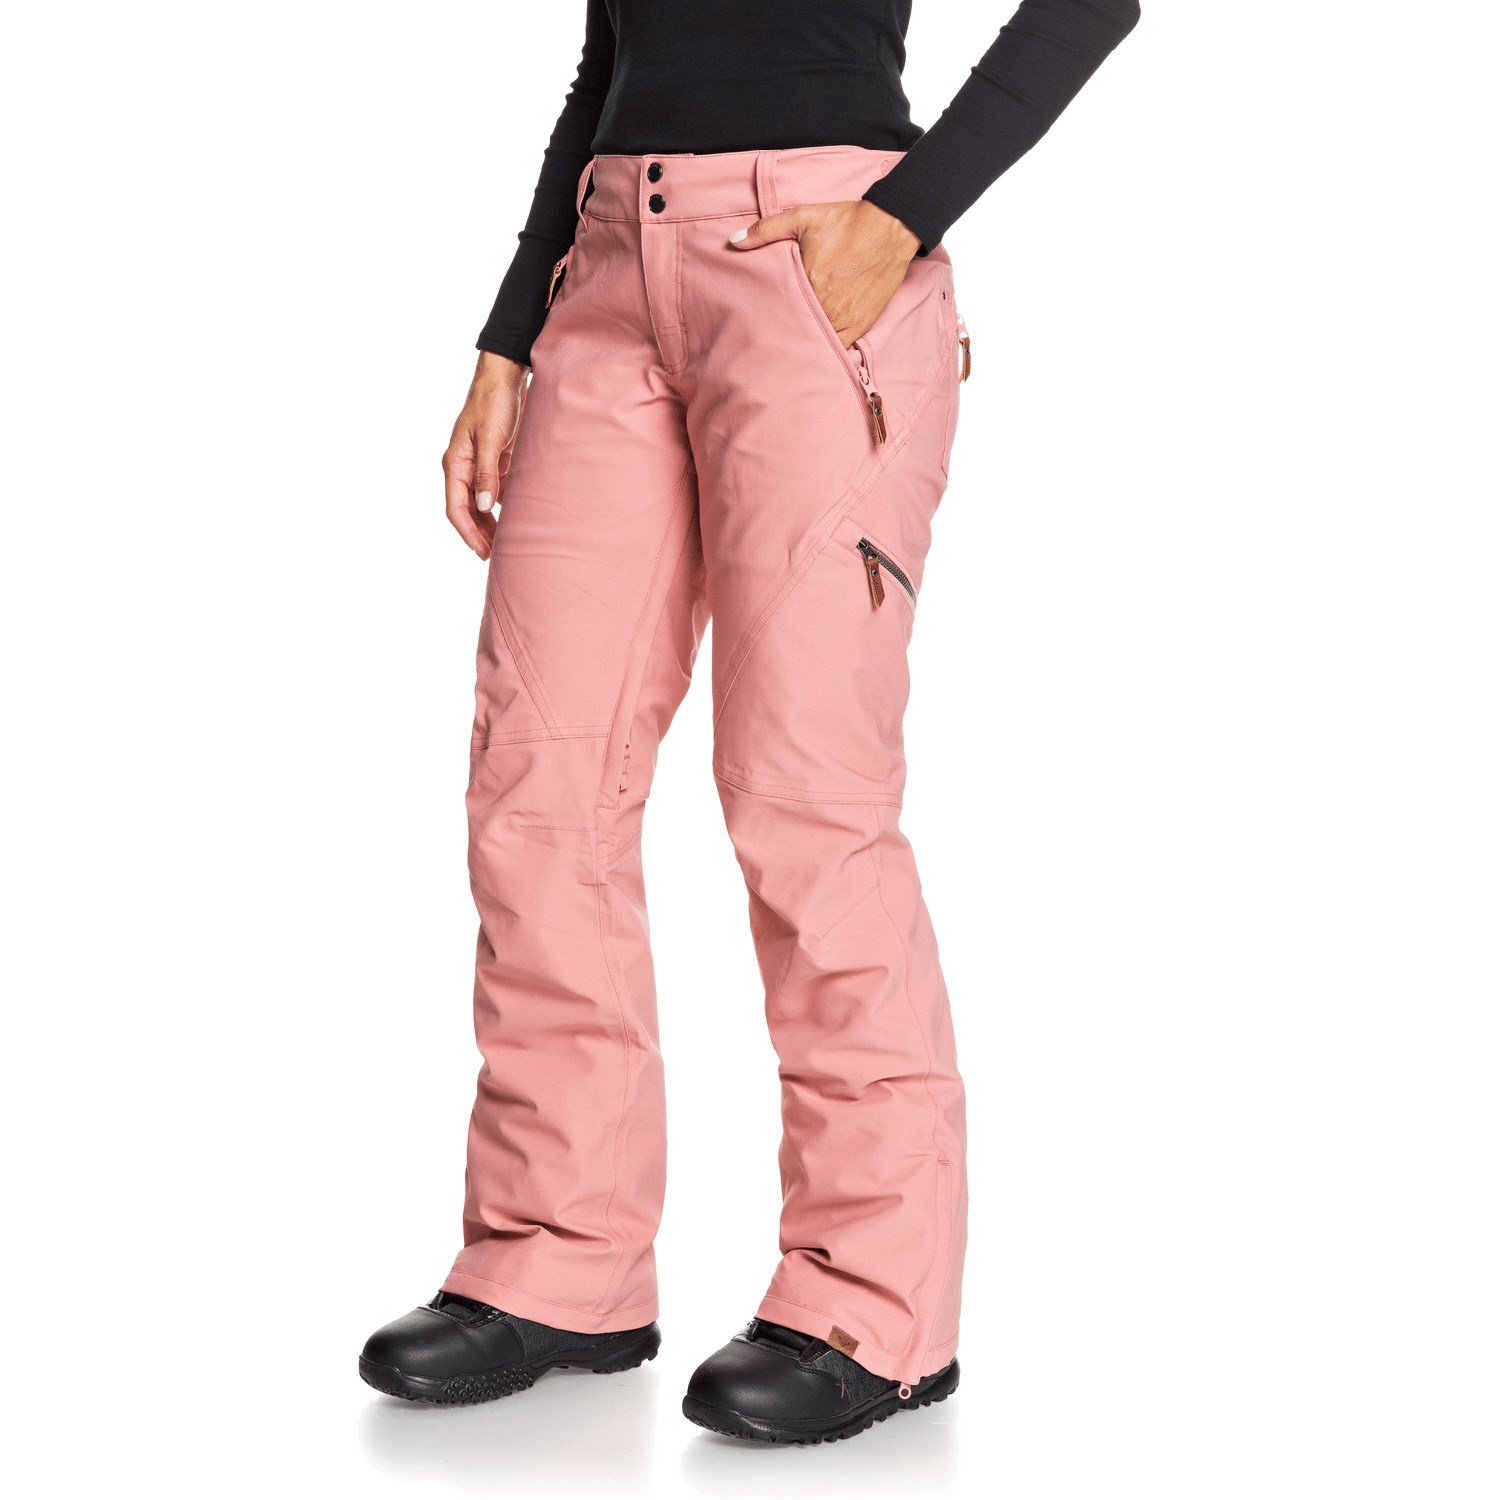 Details about   ROXY Women's Cabin Shell Snow Pants